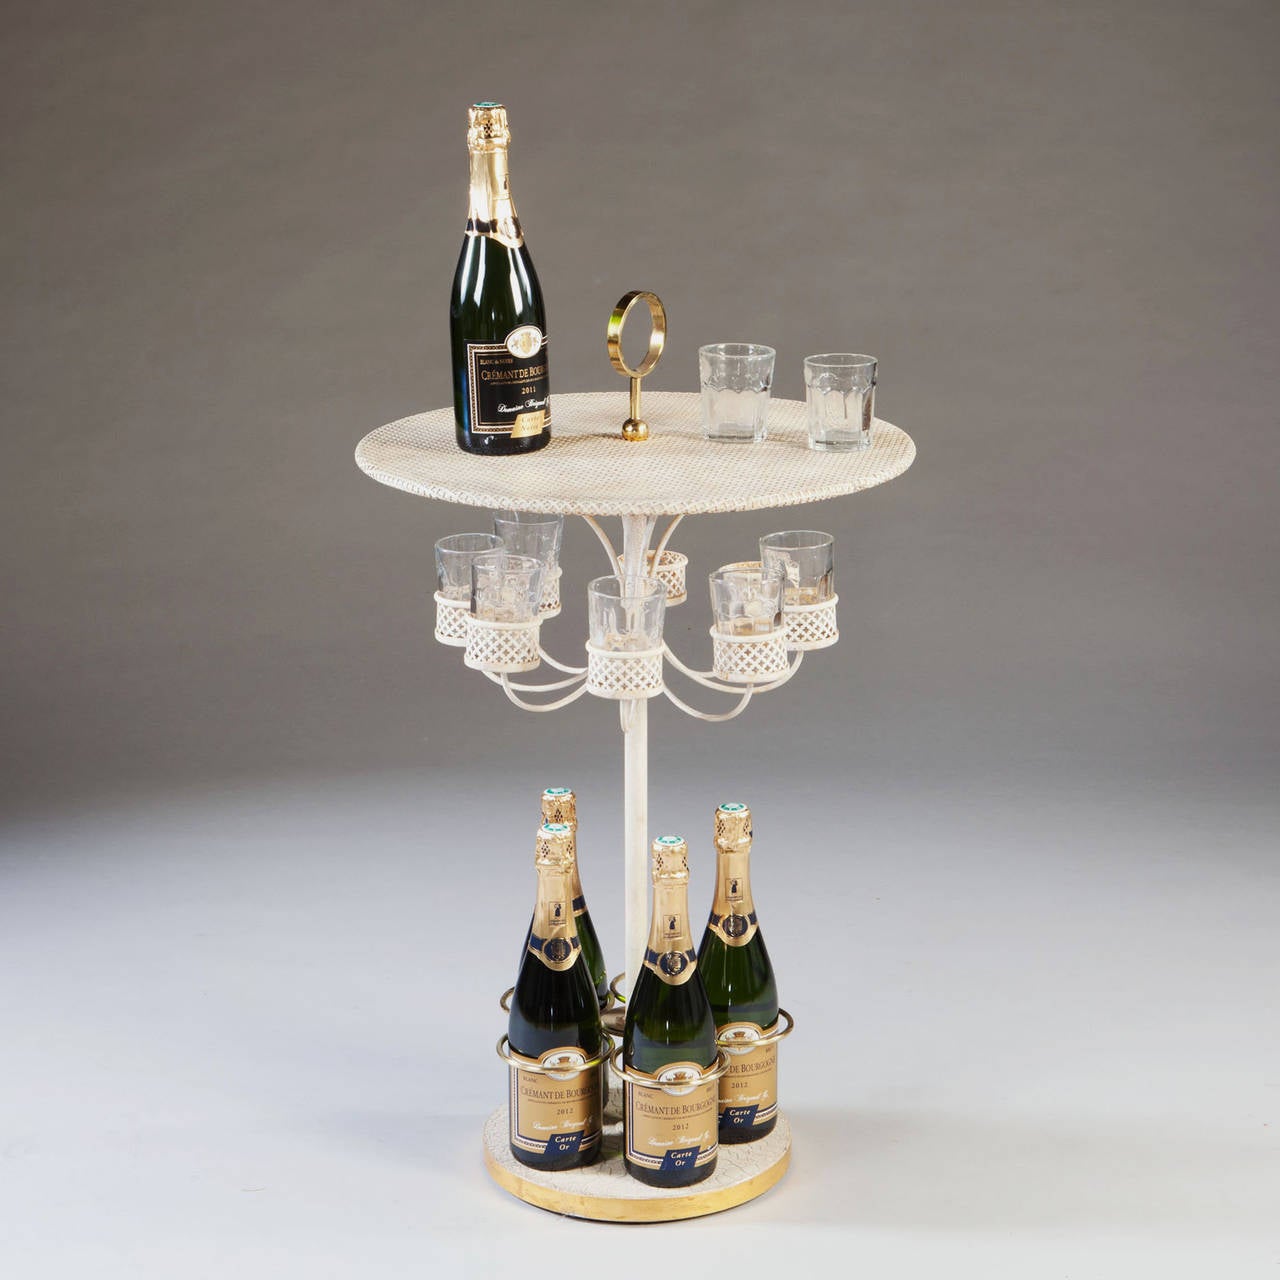 Pierced sheet metal is employed to create the circular top and the eight glass holders, the top having a brass carrying handle. At the base there are five brass rings to retain bottles and the whole stands on a weighted circular plinth